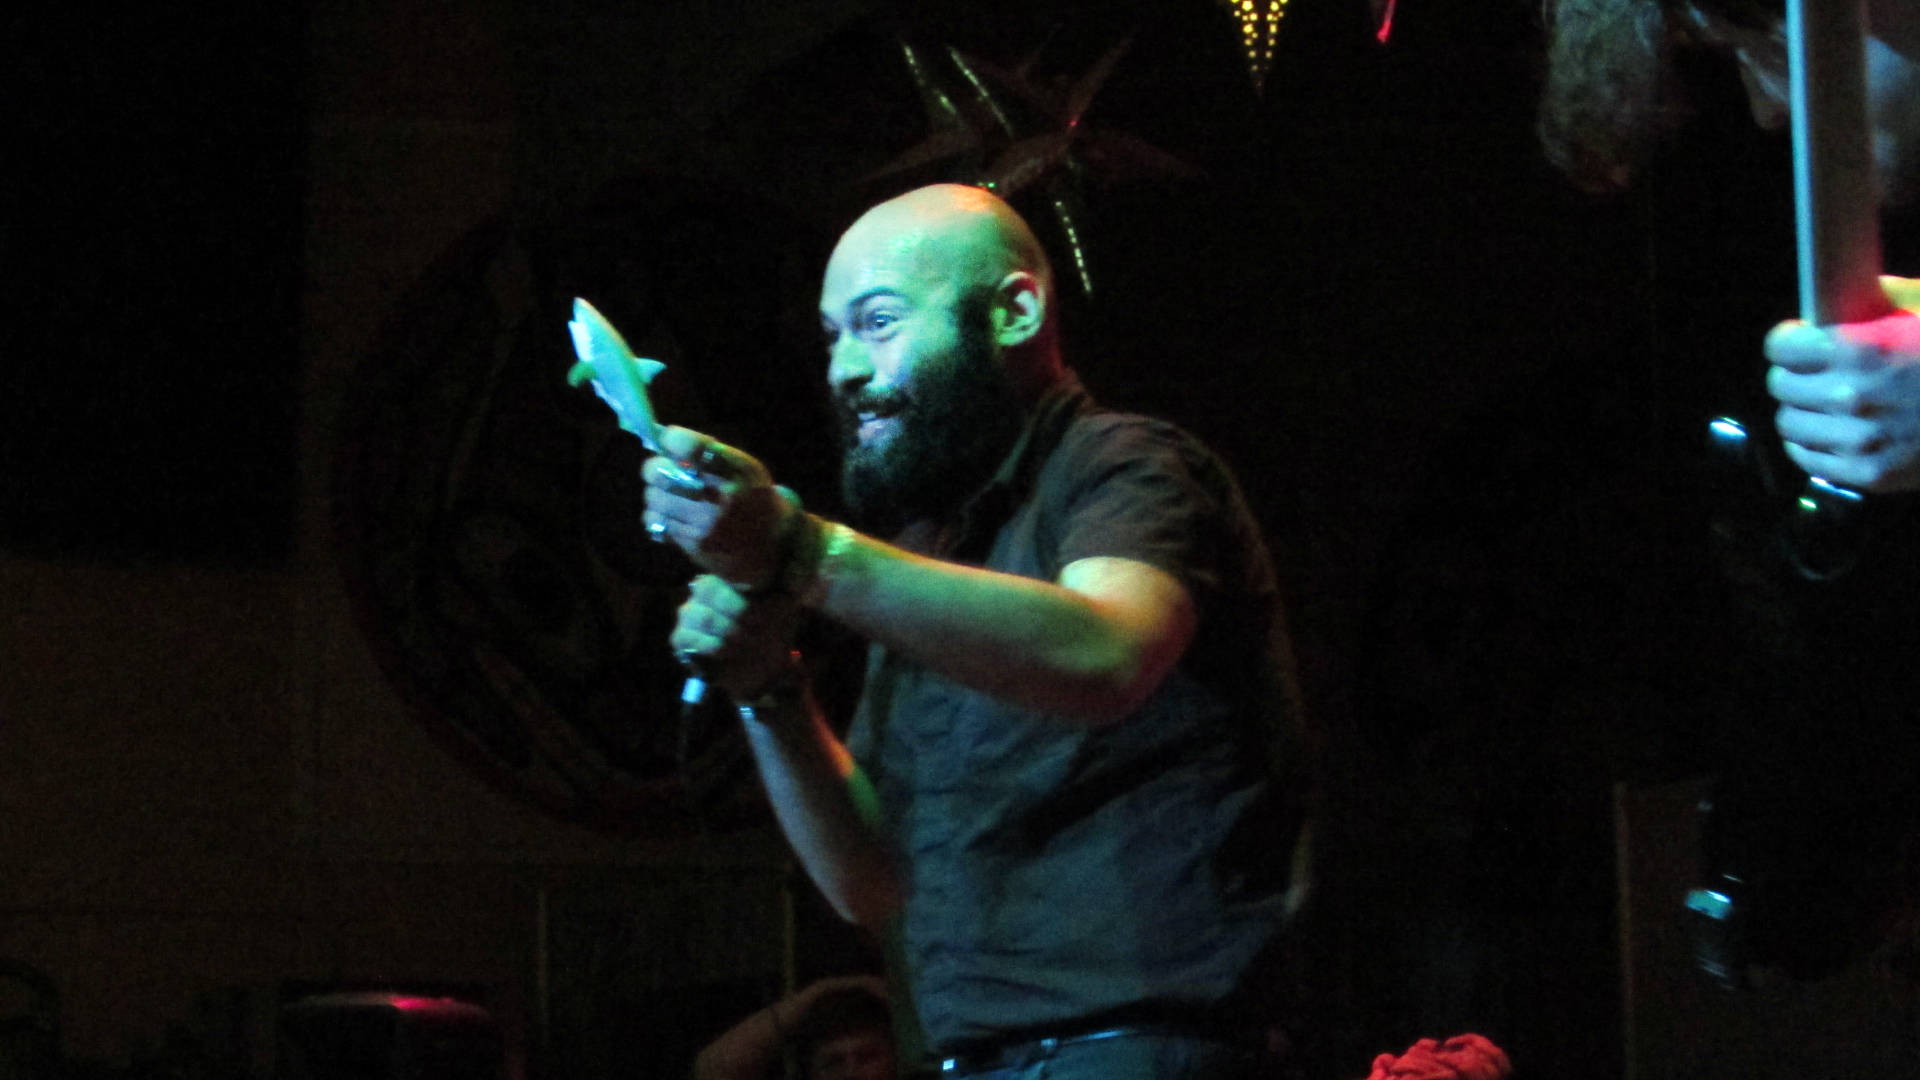 Seth Santana, vocalist for Before You’re Nothing, holds up a plastic shark during the Fall Freakshow metal concert at the JACC. The toy shortly thereafter was tossed into the audience. (Ben Hohenstatt | Capital City Weekly)